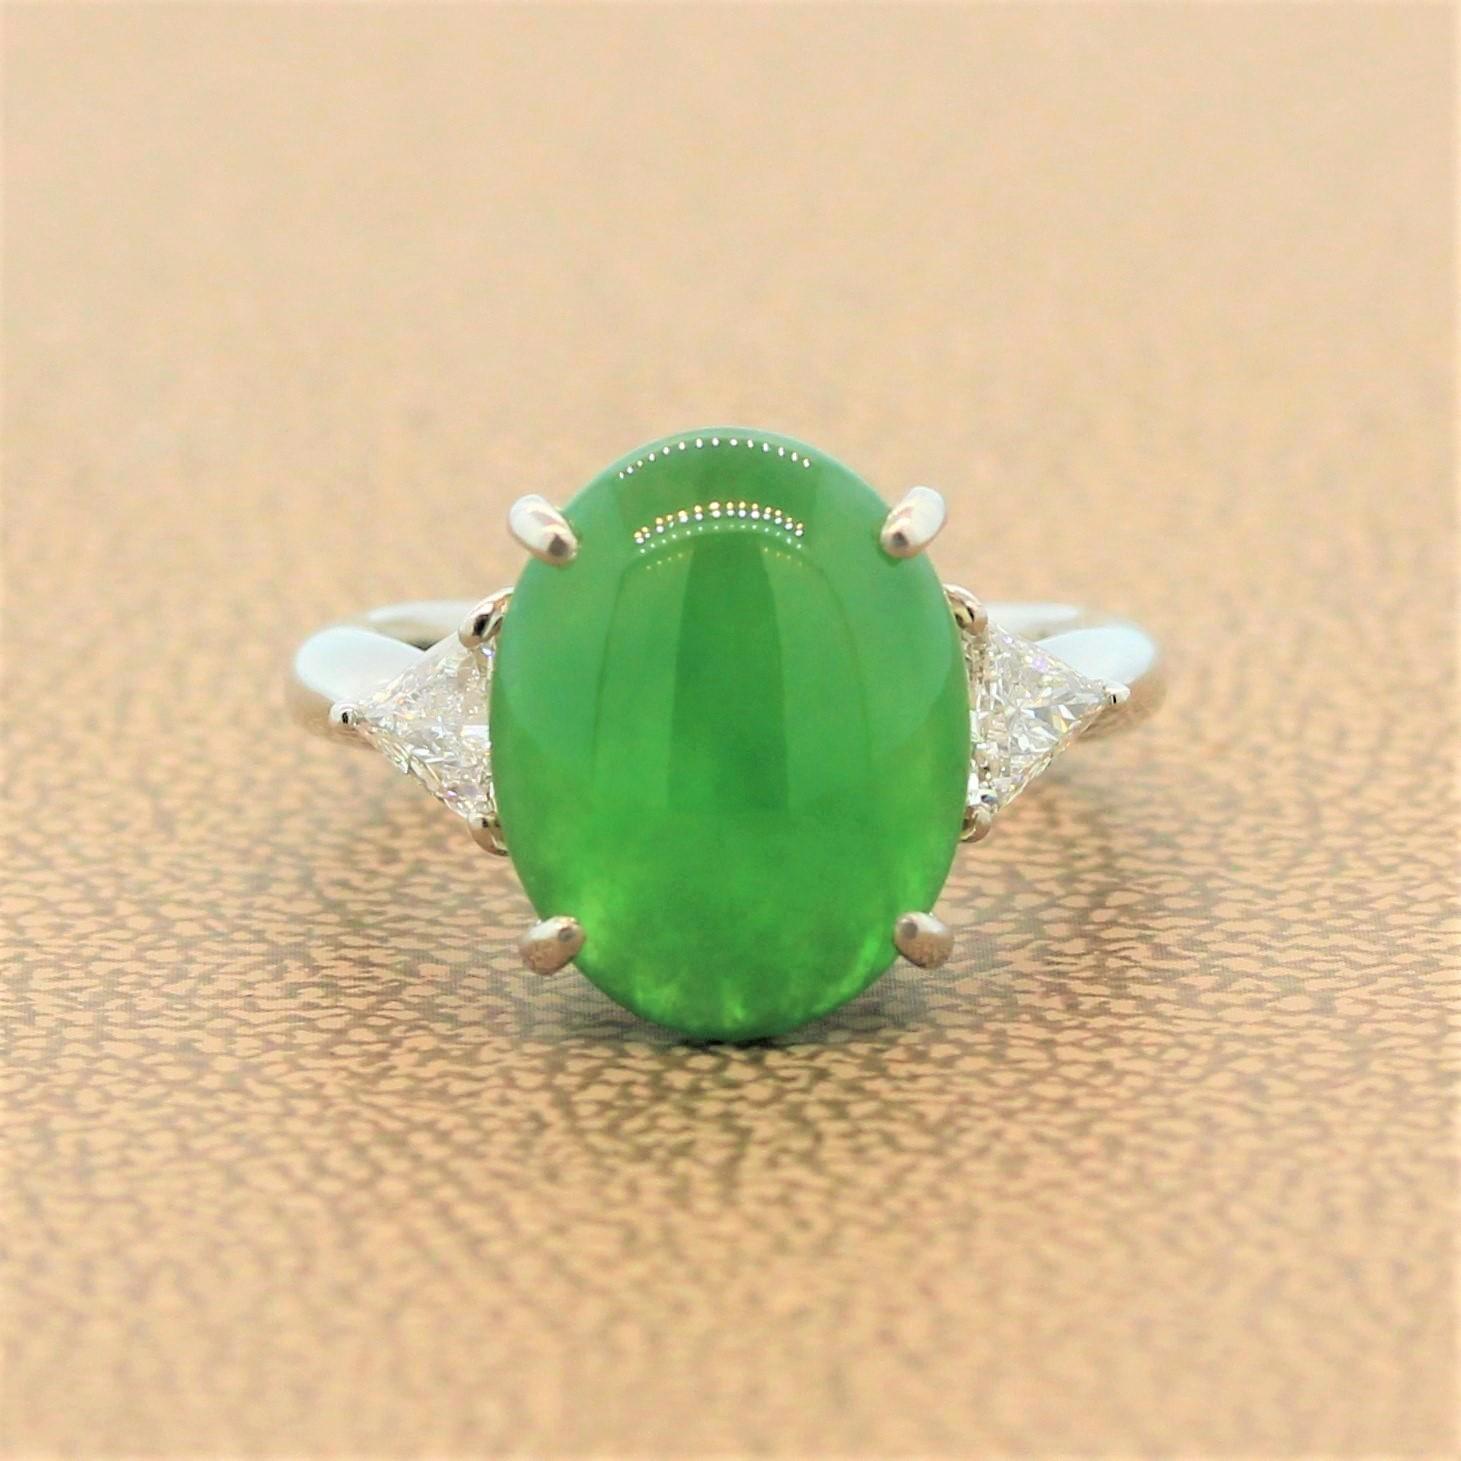 A clean design for this remarkable contemporary ring featuring an exquisite 5.00 carat piece of jade with lively color and strong luster. The oval cabochon green jade is embellished with 2 large trillion cut diamonds totaling 0.35 carats on the